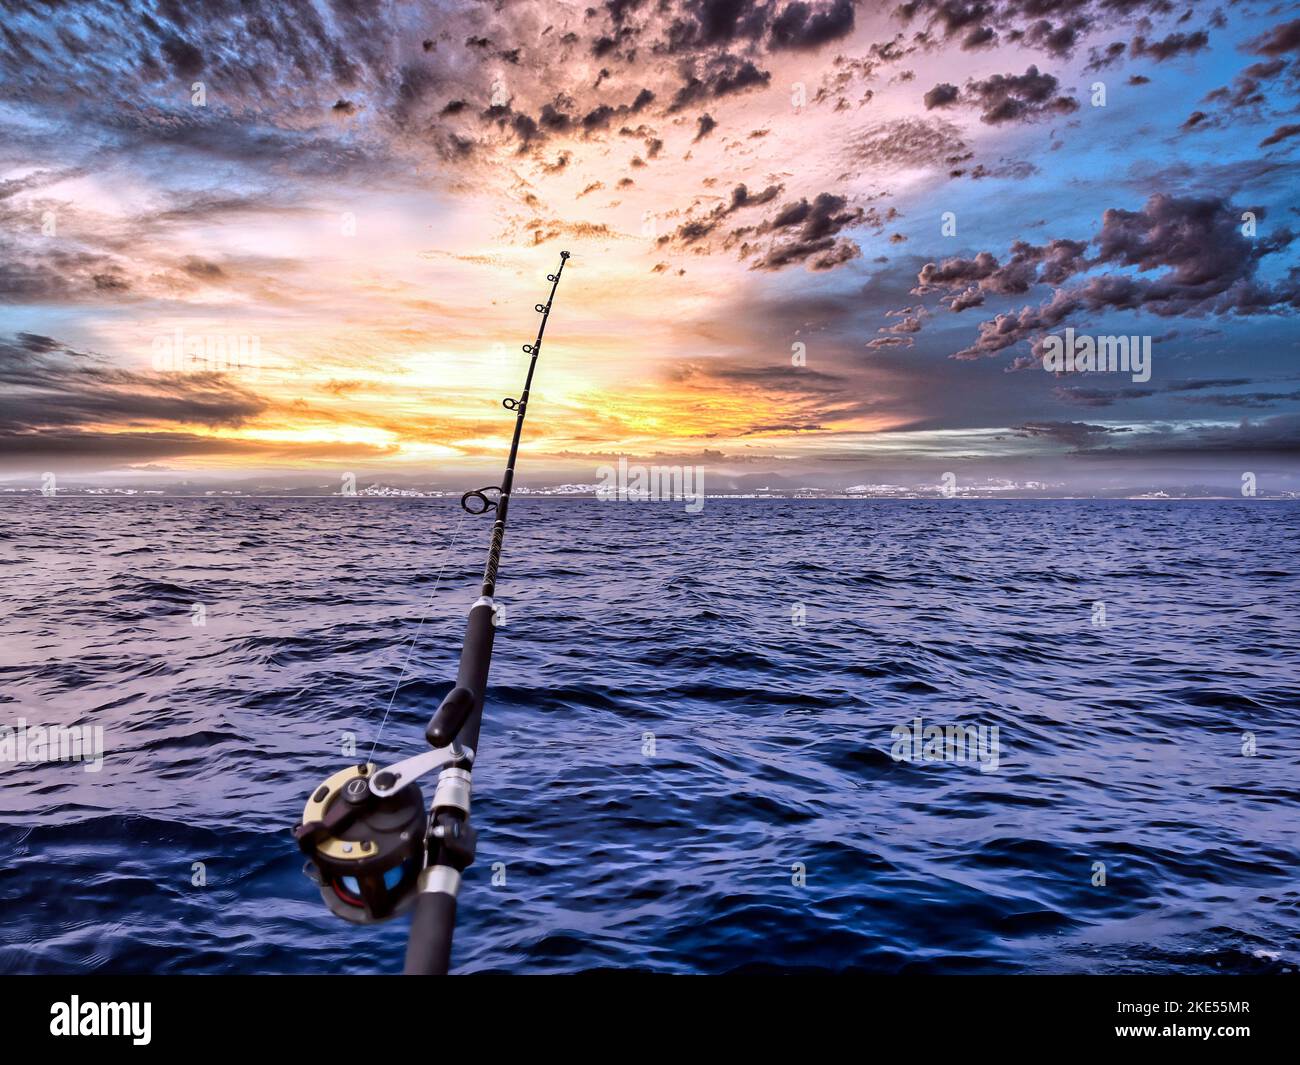 https://c8.alamy.com/comp/2KE55MR/fishing-rod-and-reel-anchored-to-the-ship-looking-for-a-big-catching-in-a-deep-seascape-offshore-at-sunrise-2KE55MR.jpg